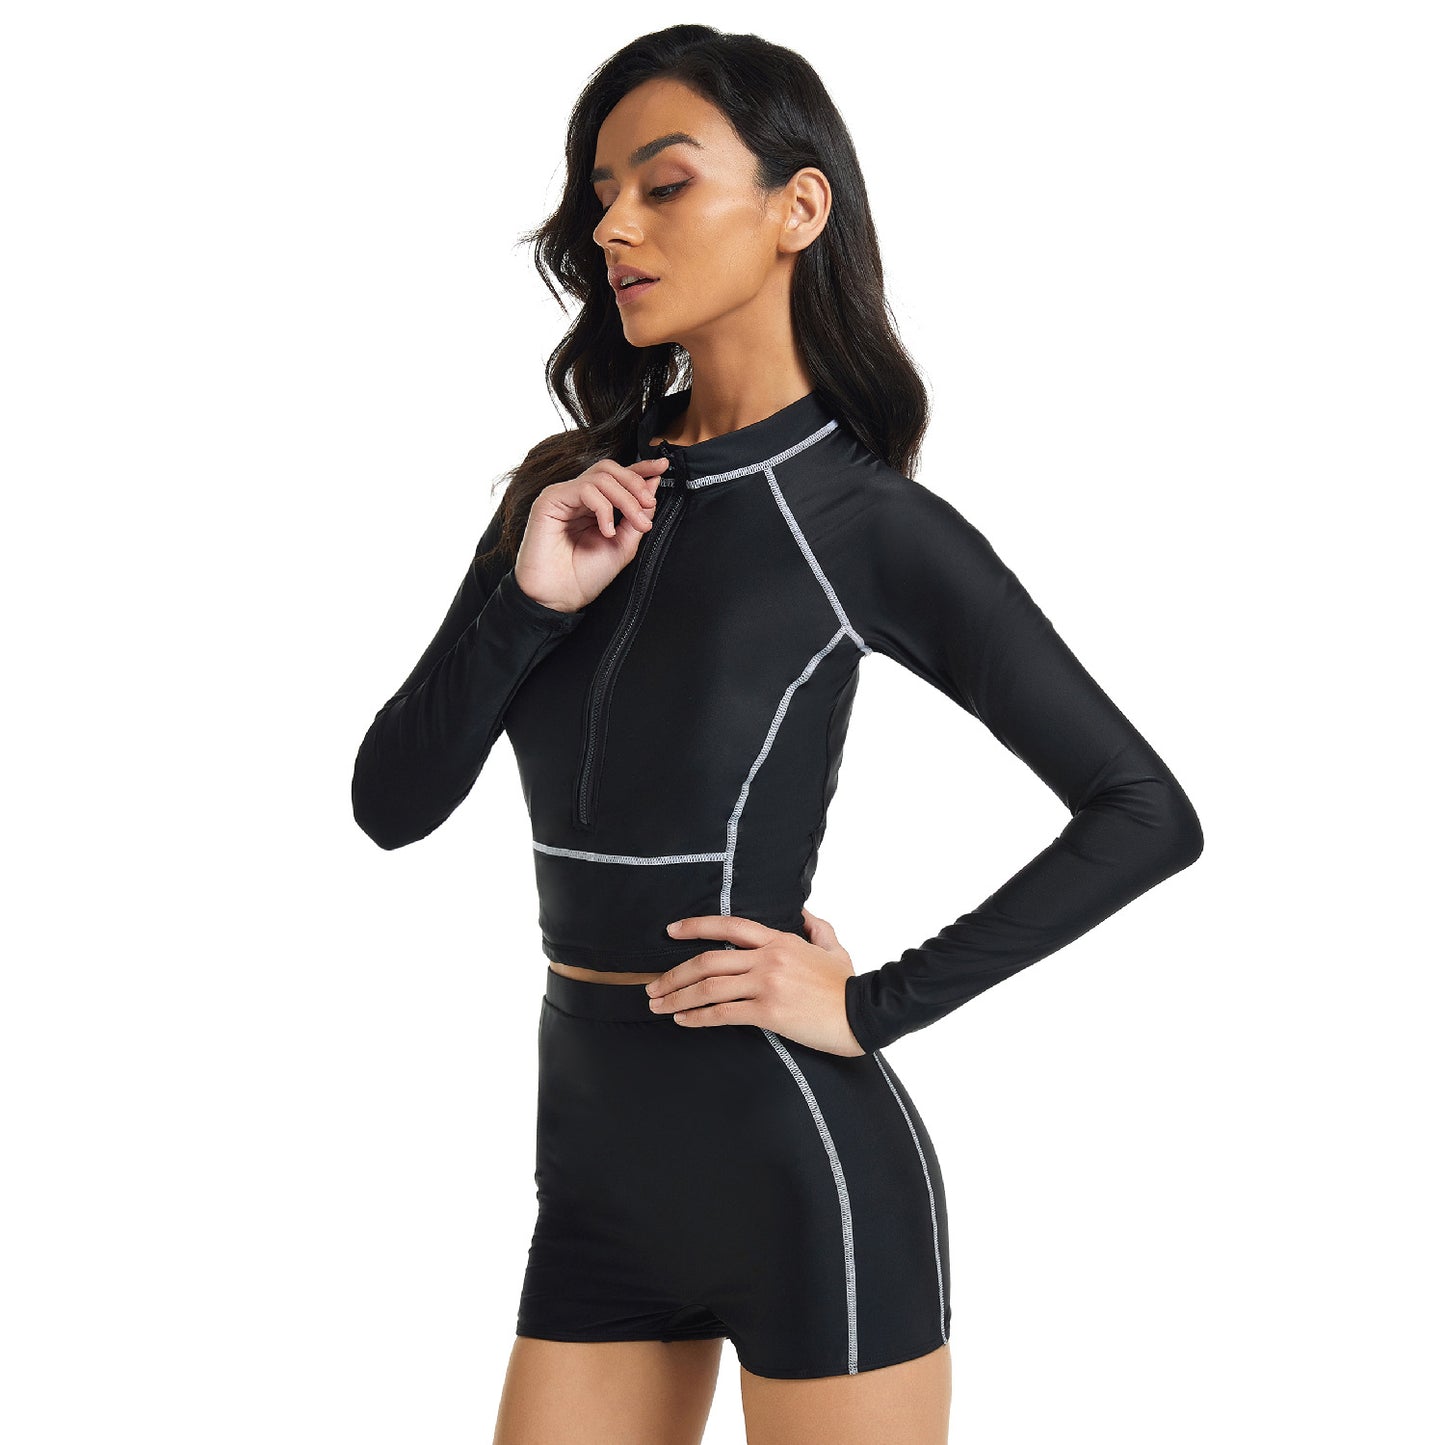 Black Long Sleeves Surfing Wetsuits for Women